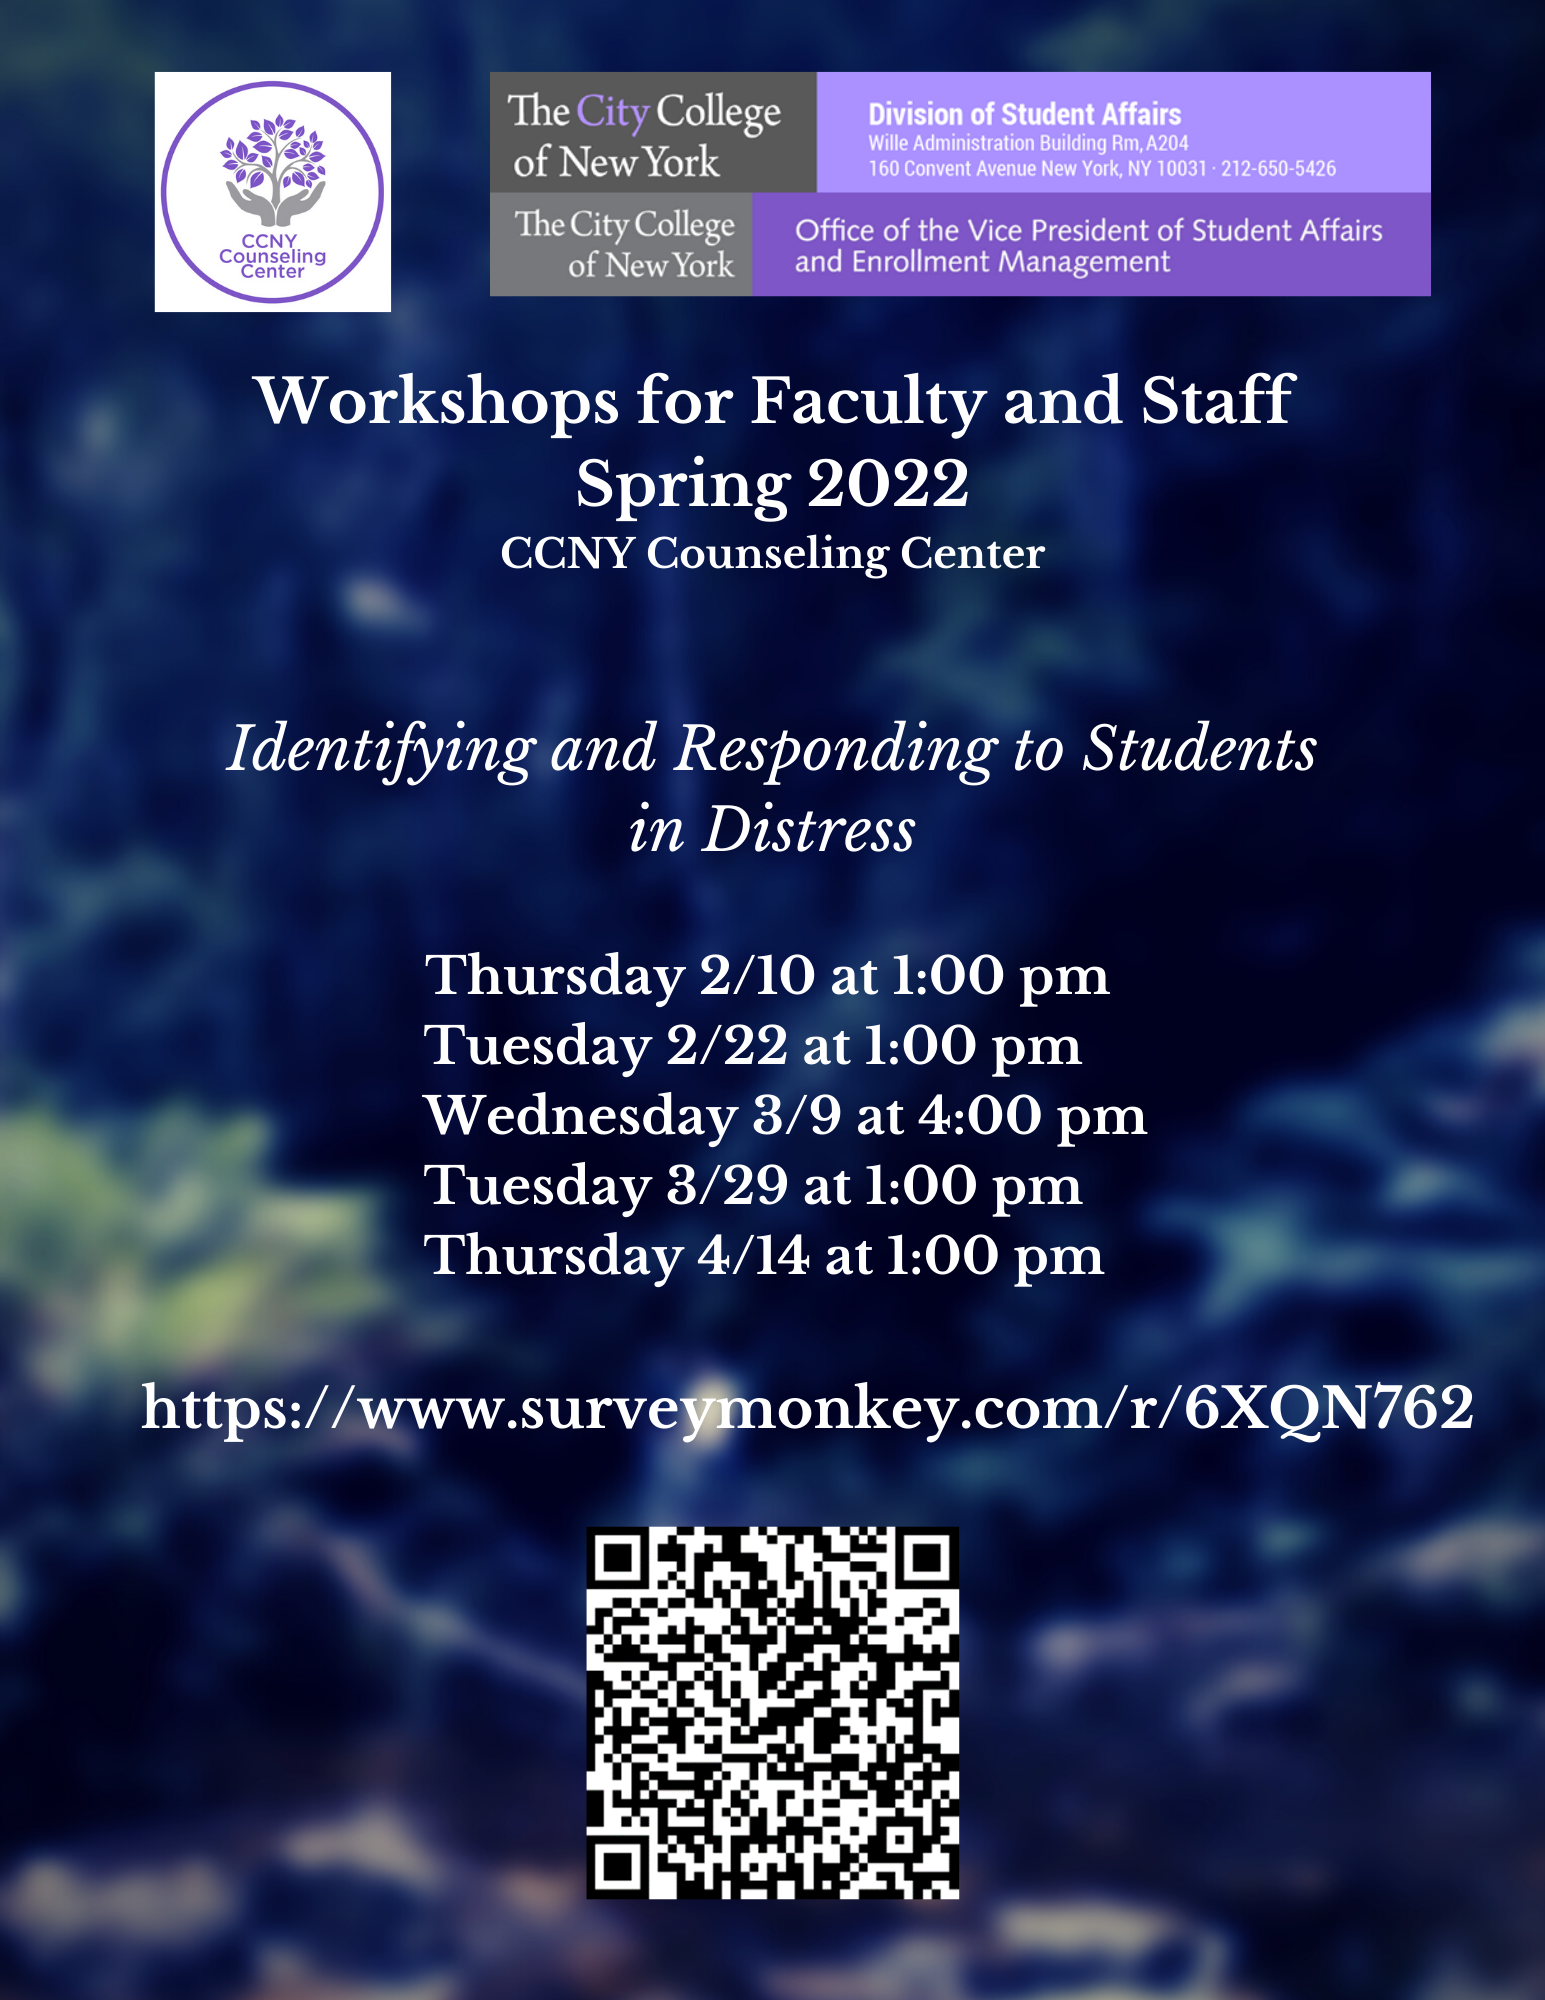 WSs for faculty and staff - spring 2022